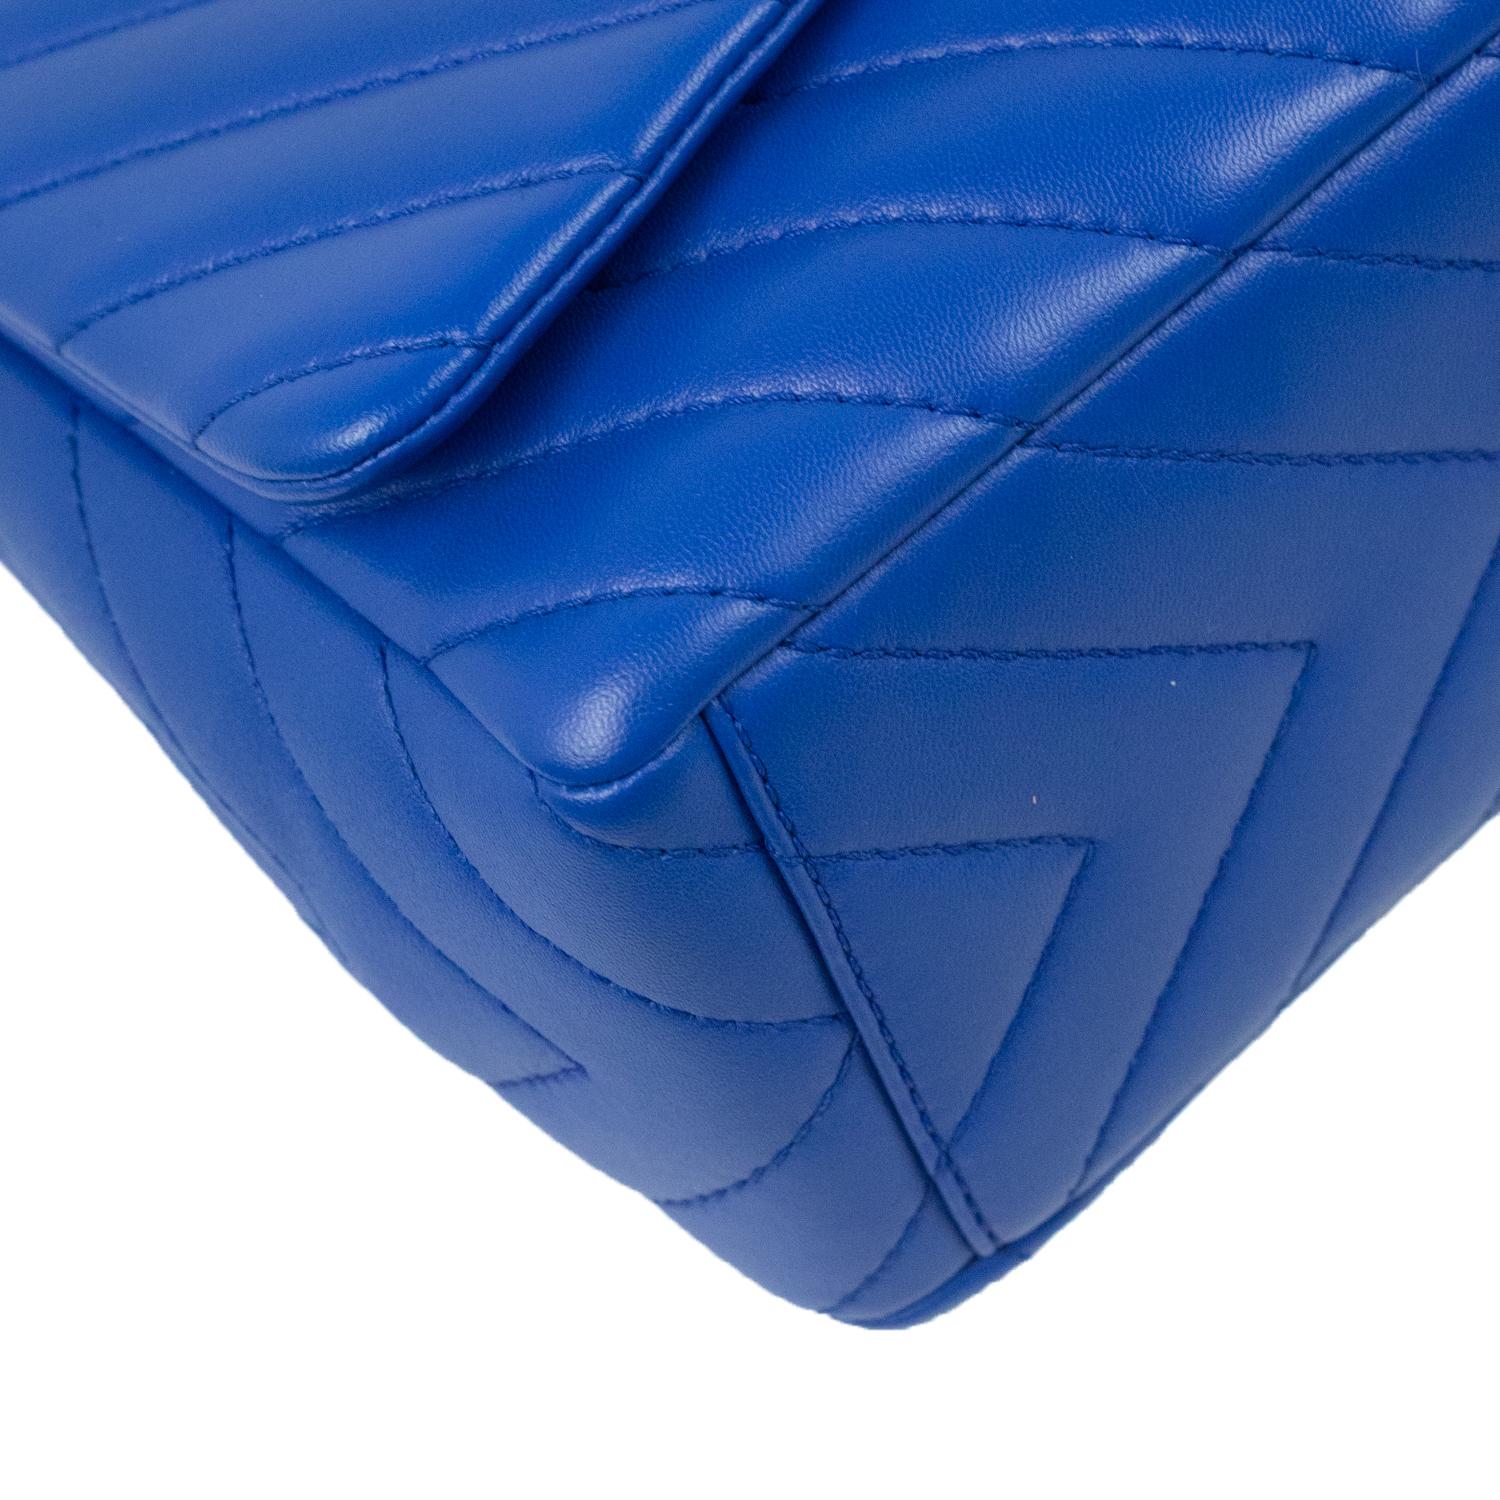 CHANEL, Jumbo in blue leather 5